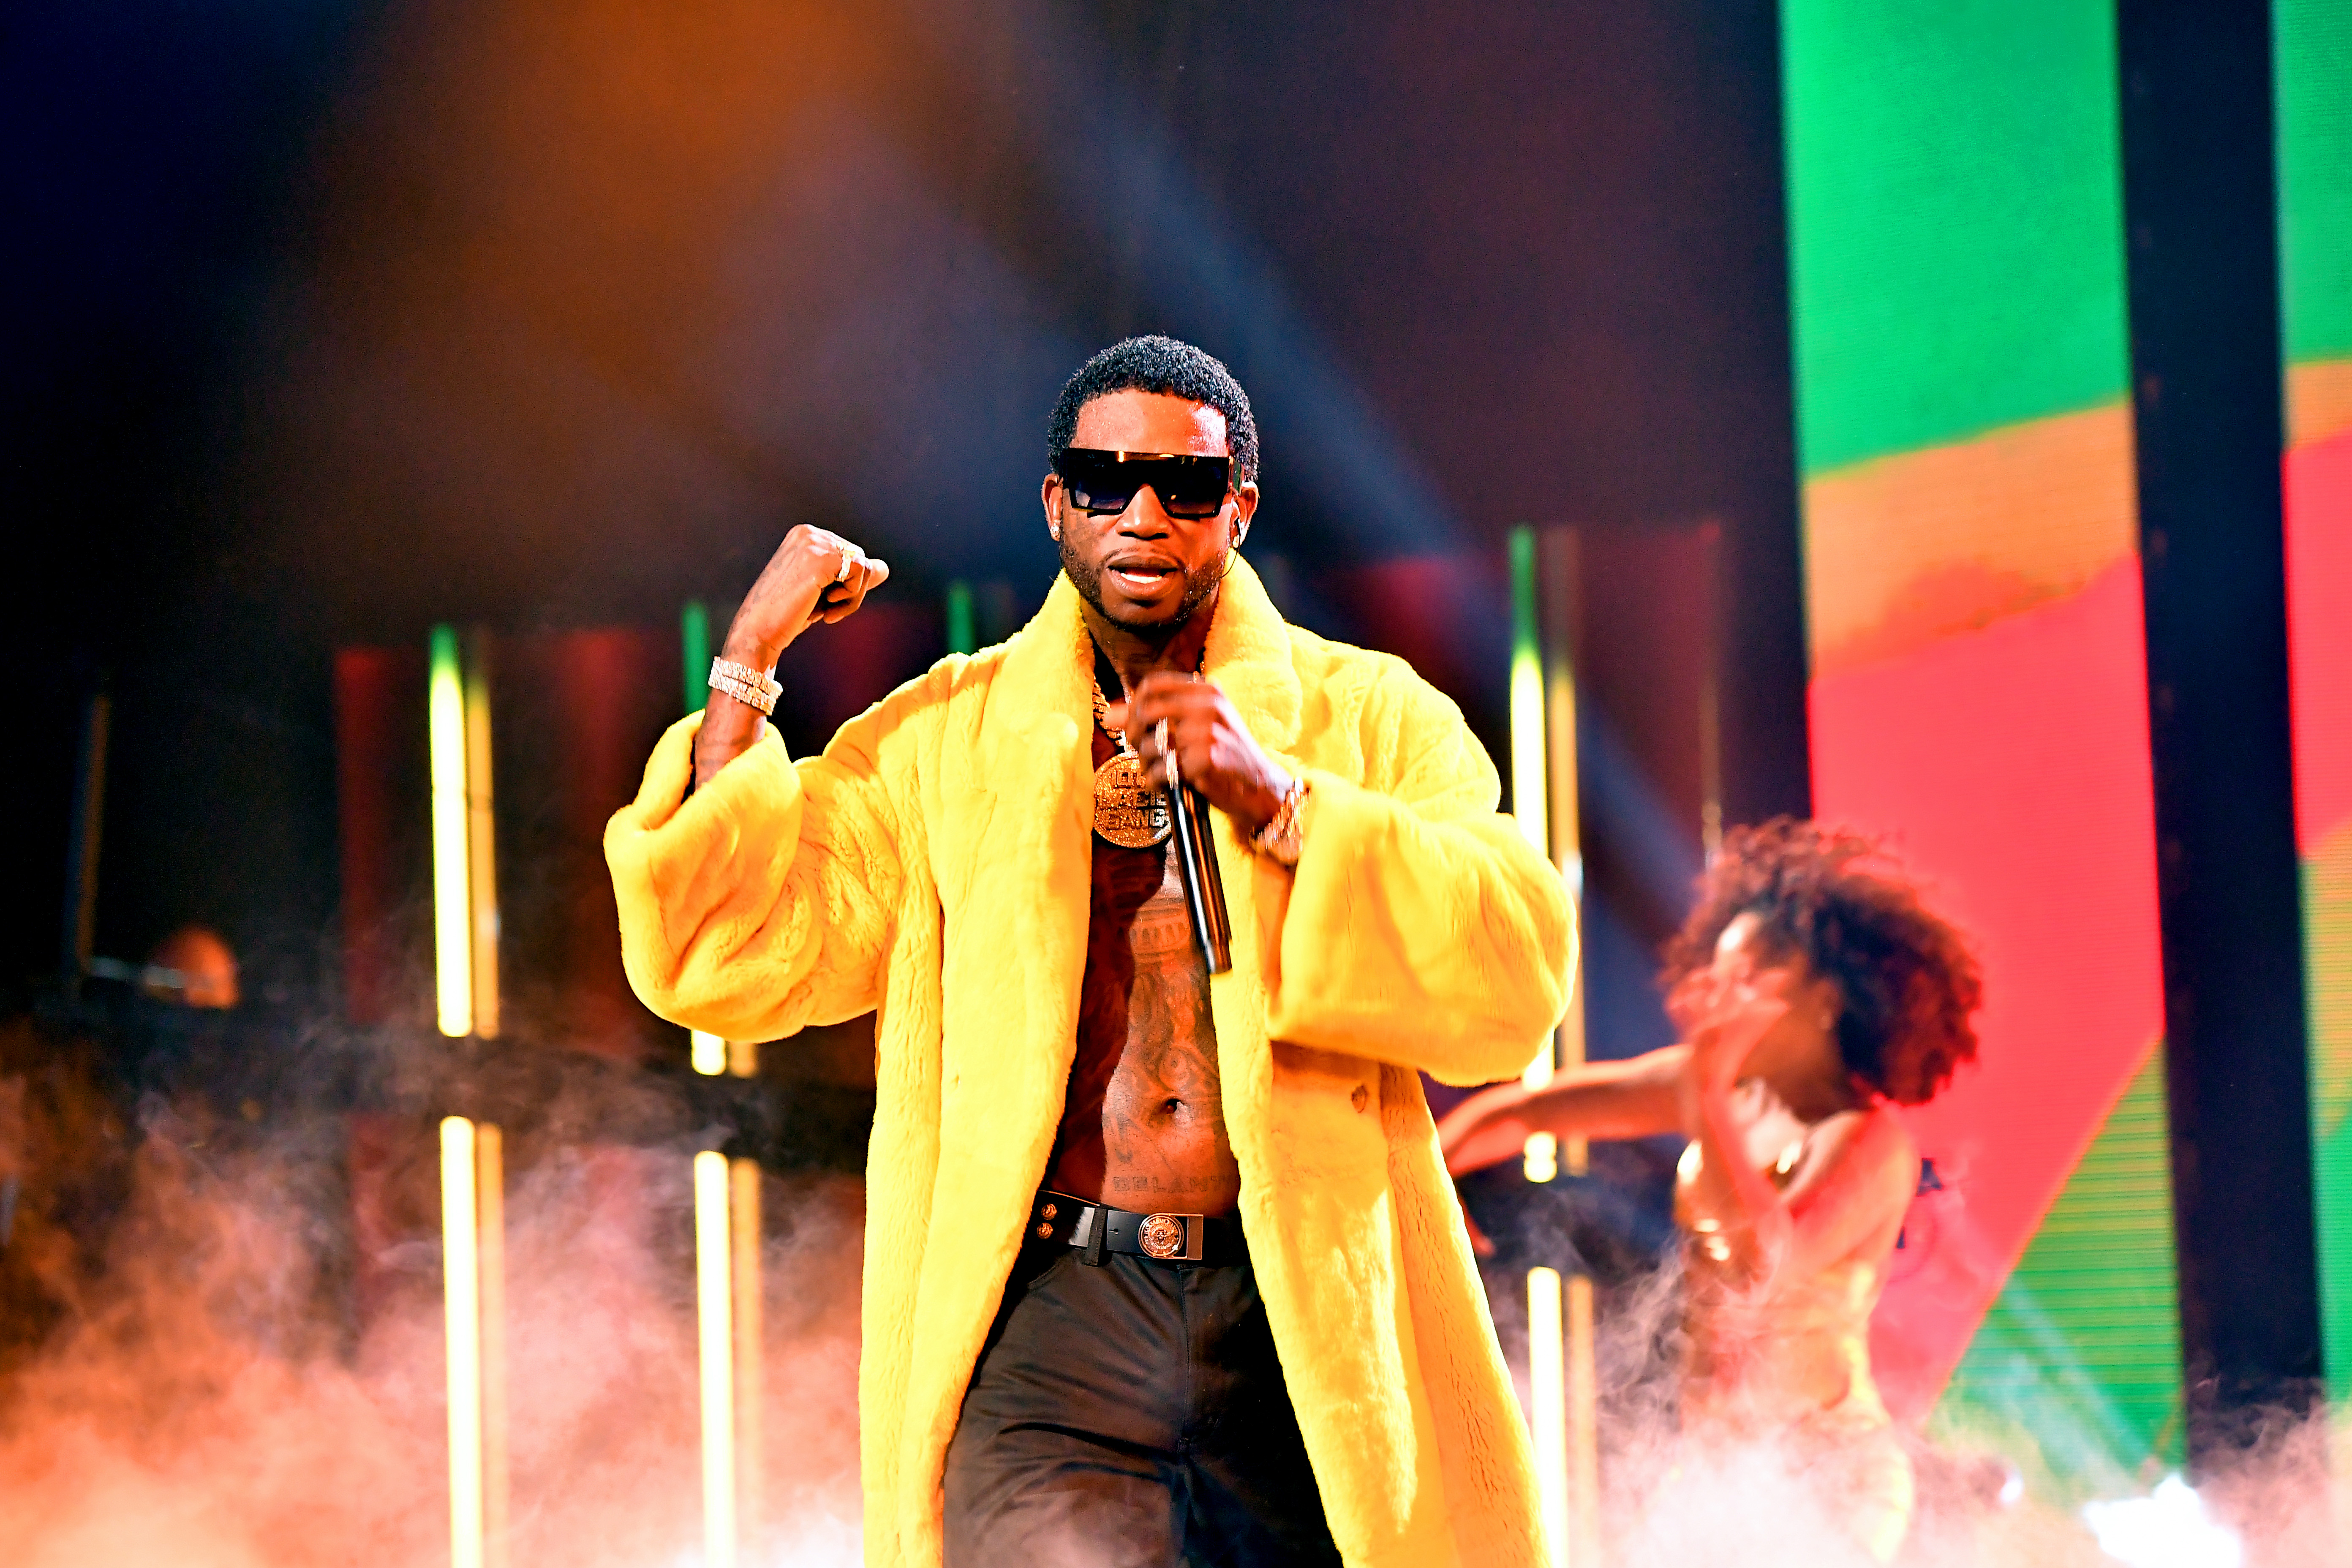 Gucci Mane: Everybody Looking review – trap star's quickfire post